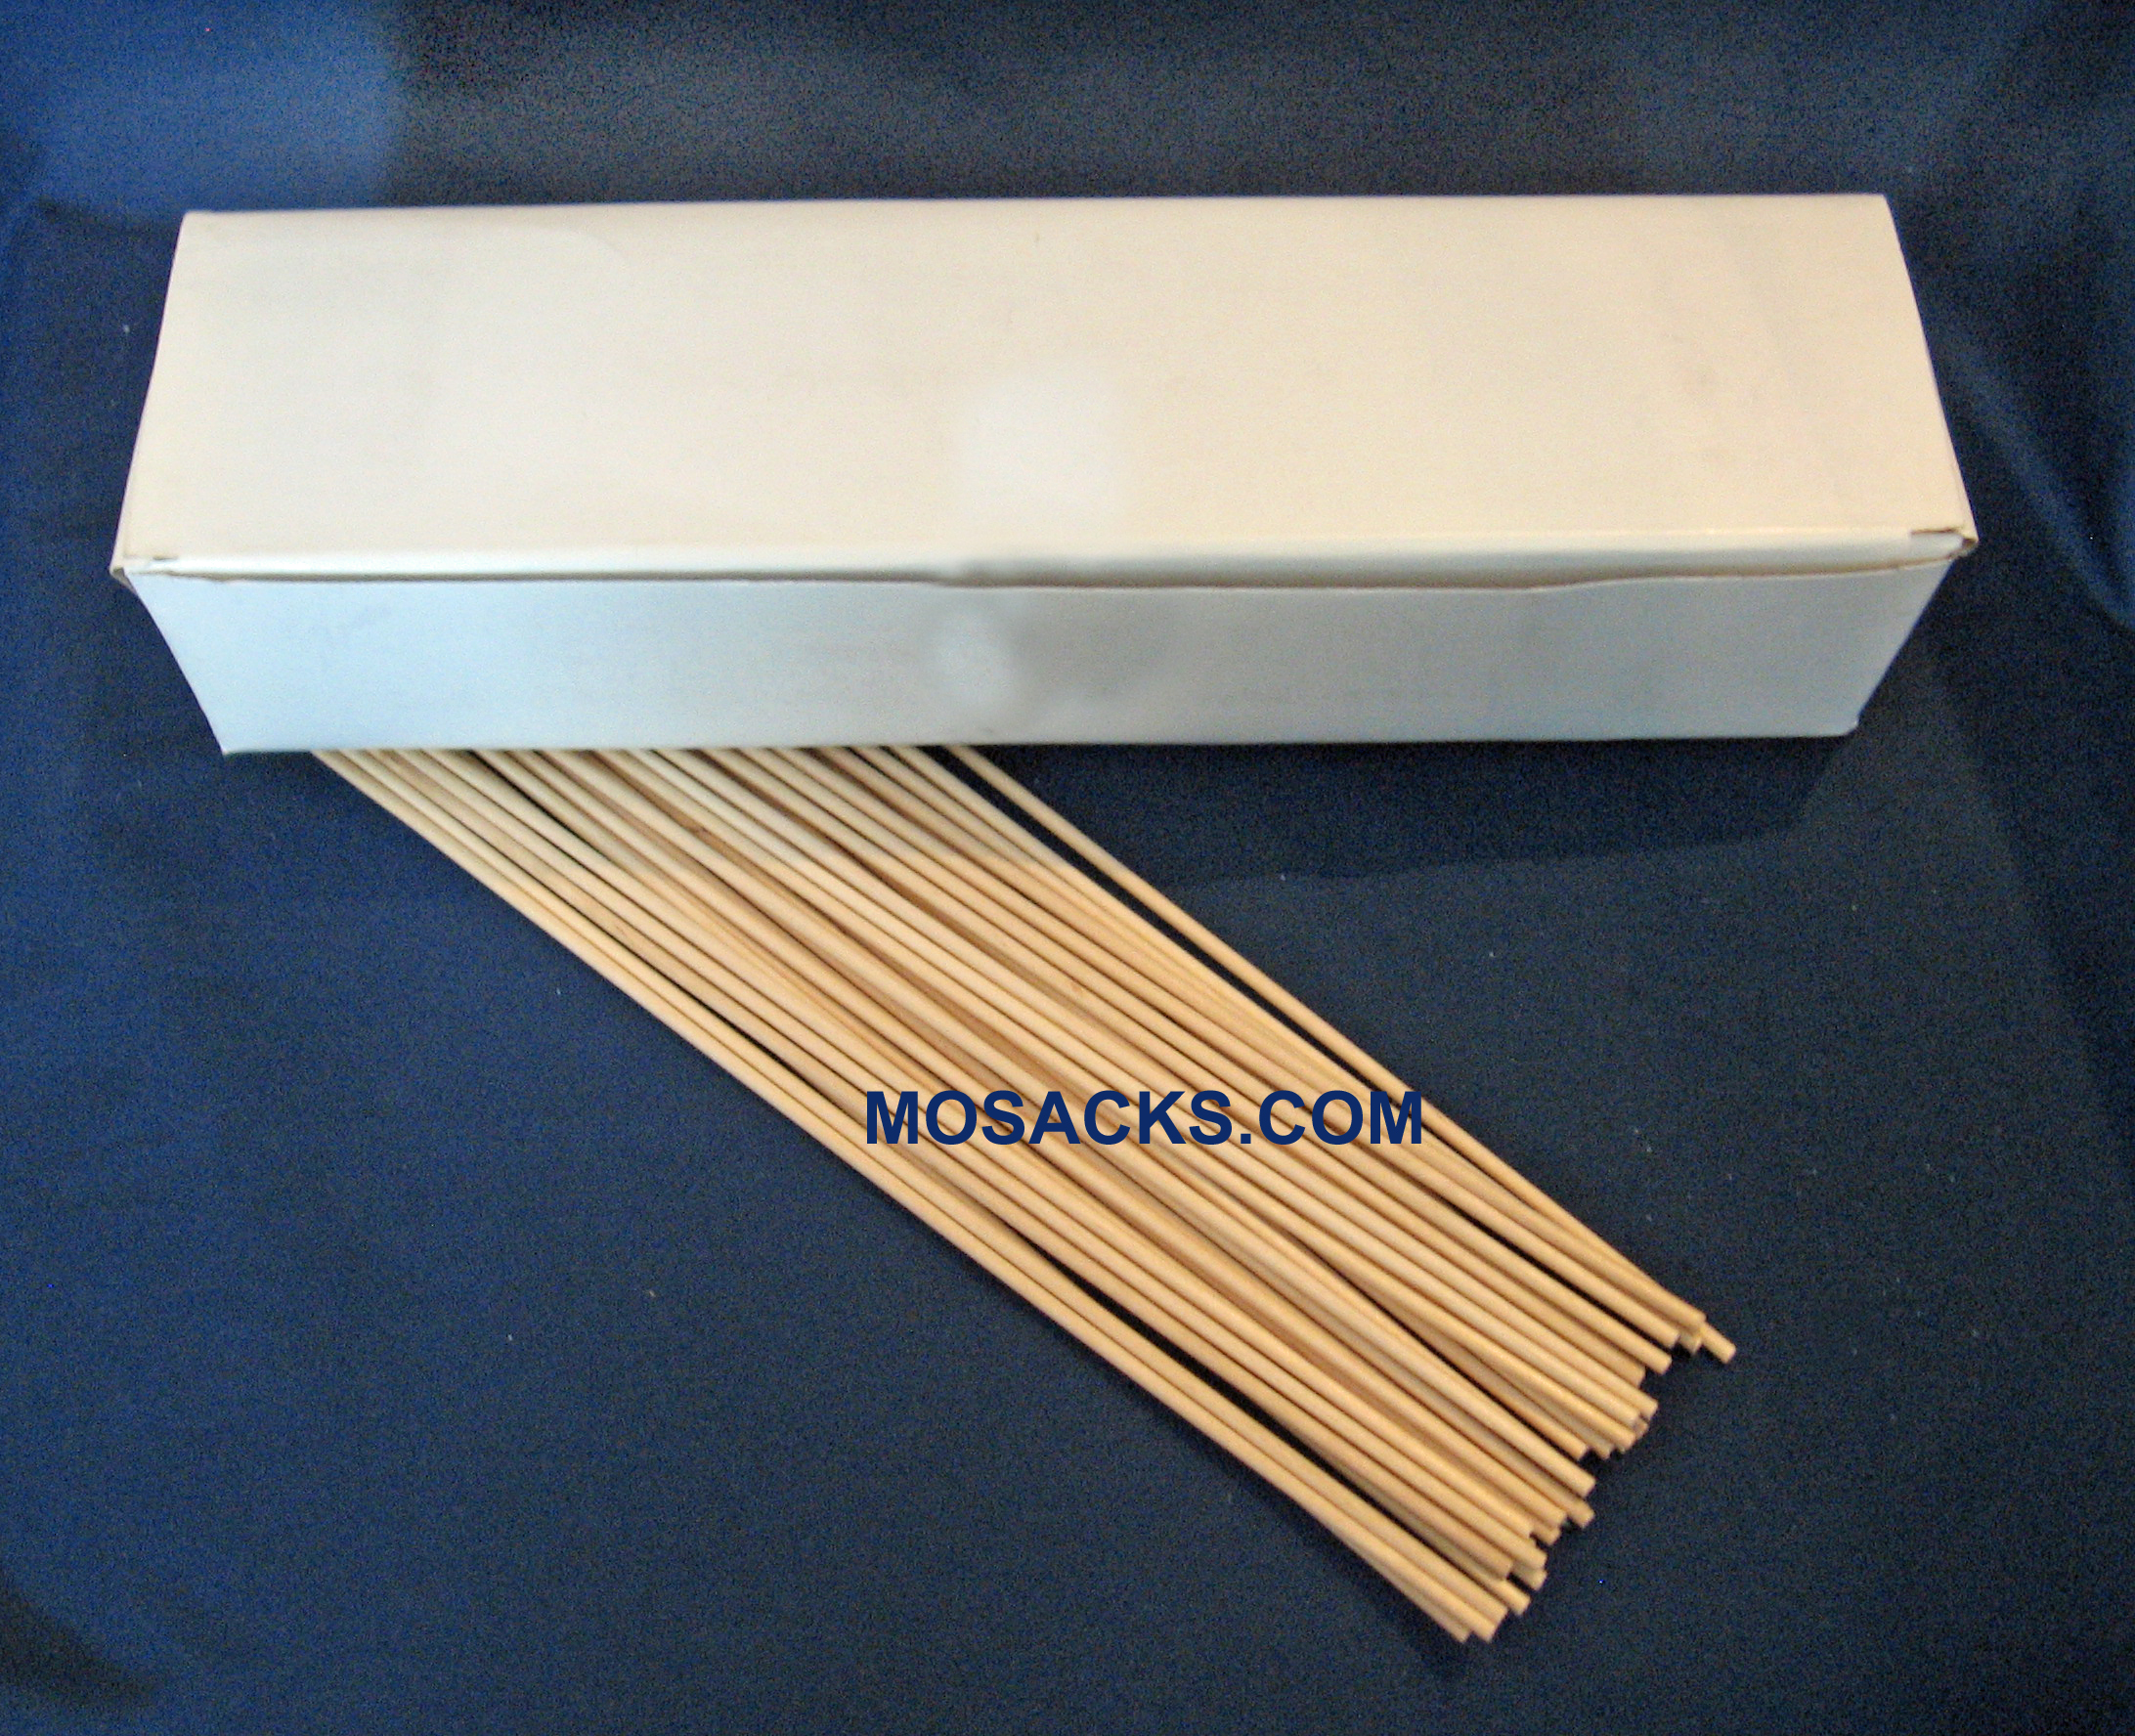 Wood Lighting Tapers 1/12" x 12" 1000 Count Cathedral Candle Wood Lighting Sticks